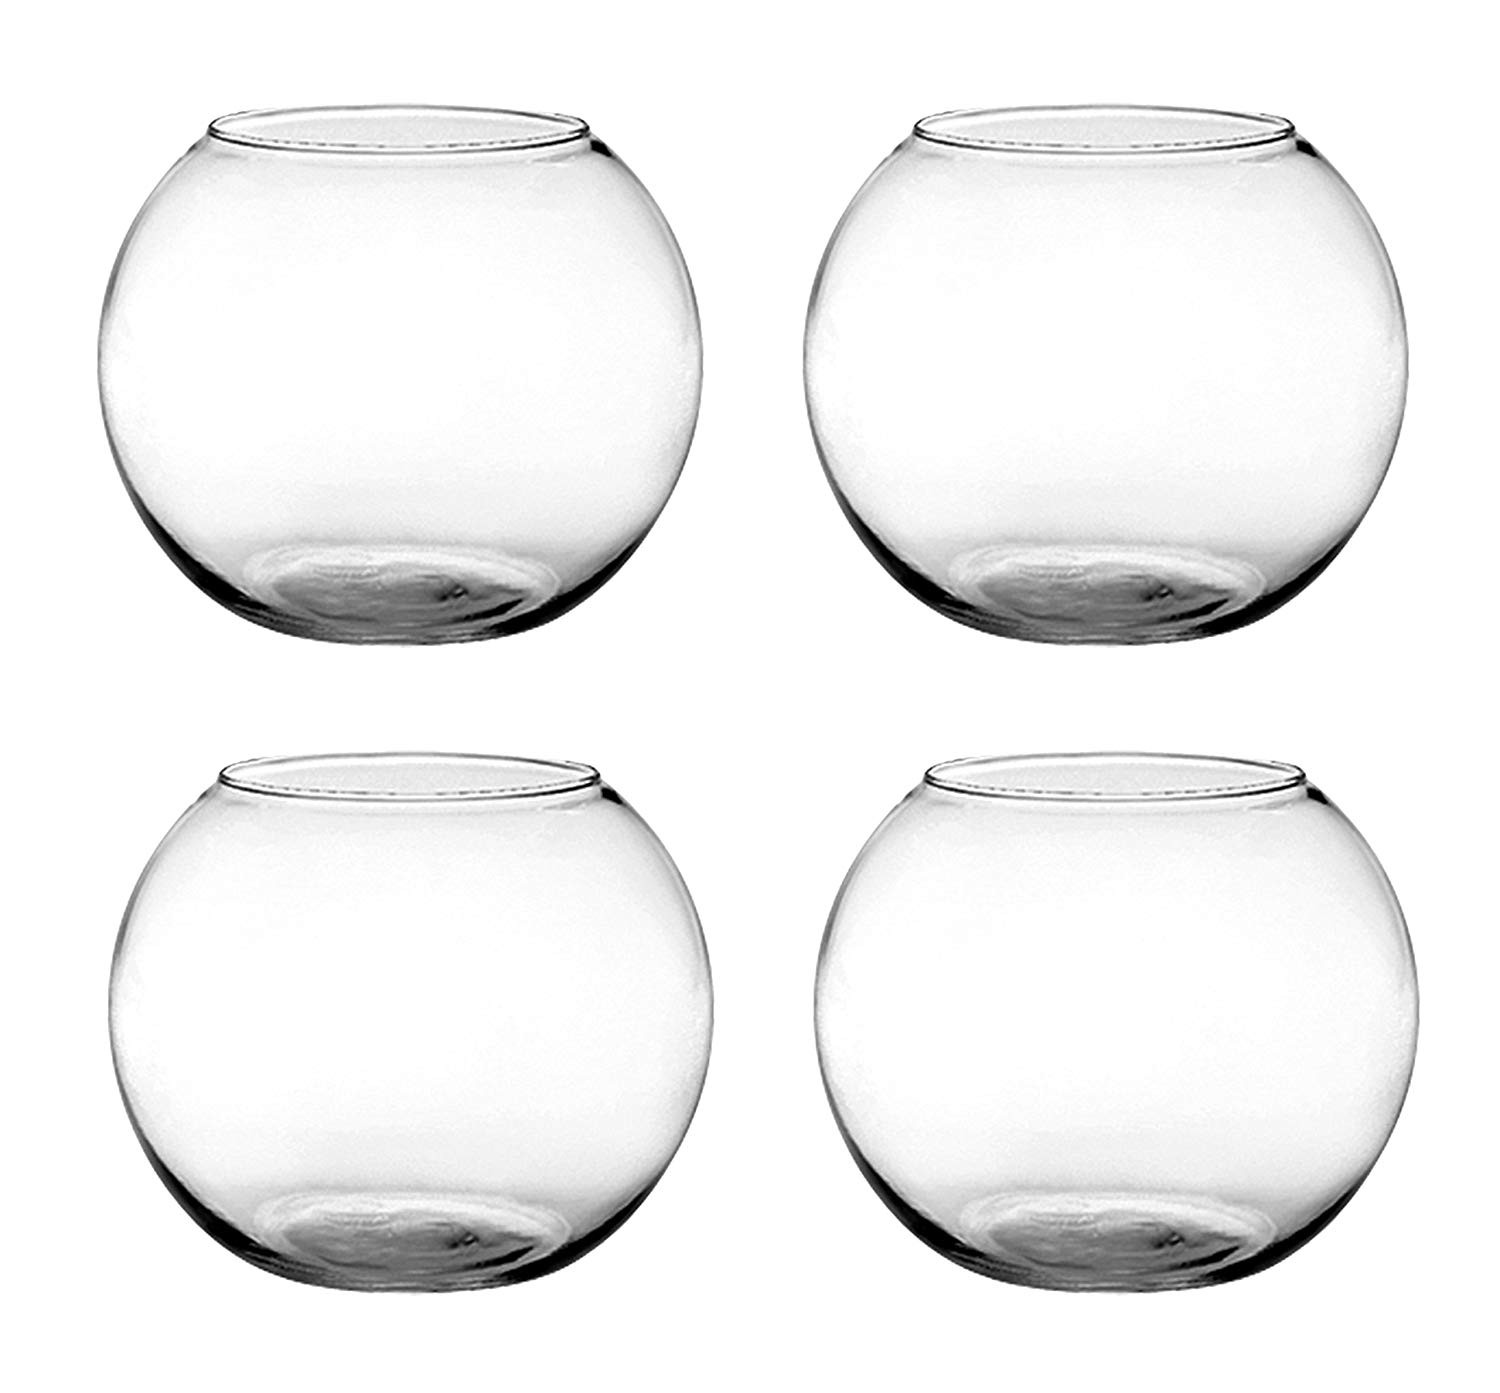 12 Best Clear Fish Bowl Vase 2024 free download clear fish bowl vase of amazon com set of 4 syndicate sales 6 inches clear rose bowl inside amazon com set of 4 syndicate sales 6 inches clear rose bowl bundled by maven gifts garden outdoor